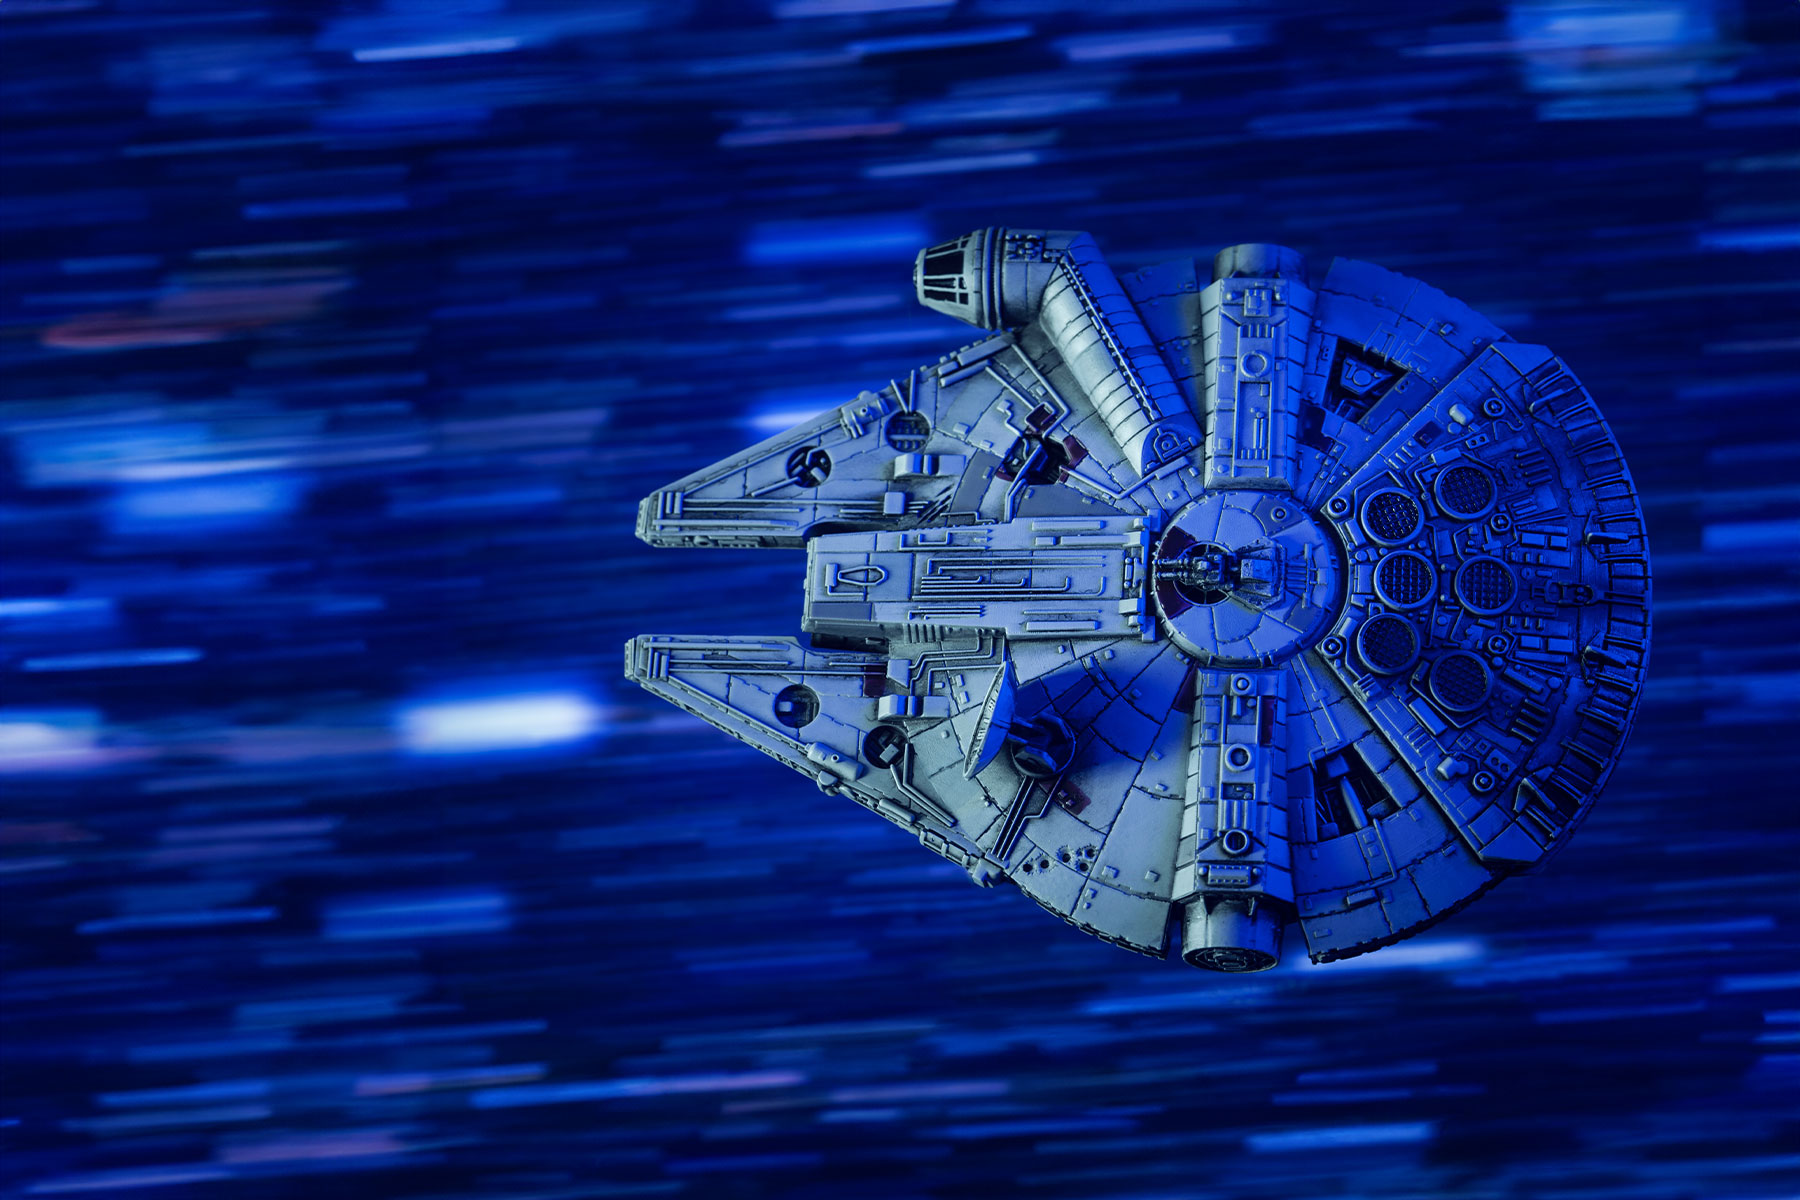 stylized rendering of the millennium falcon from star wars under blue light